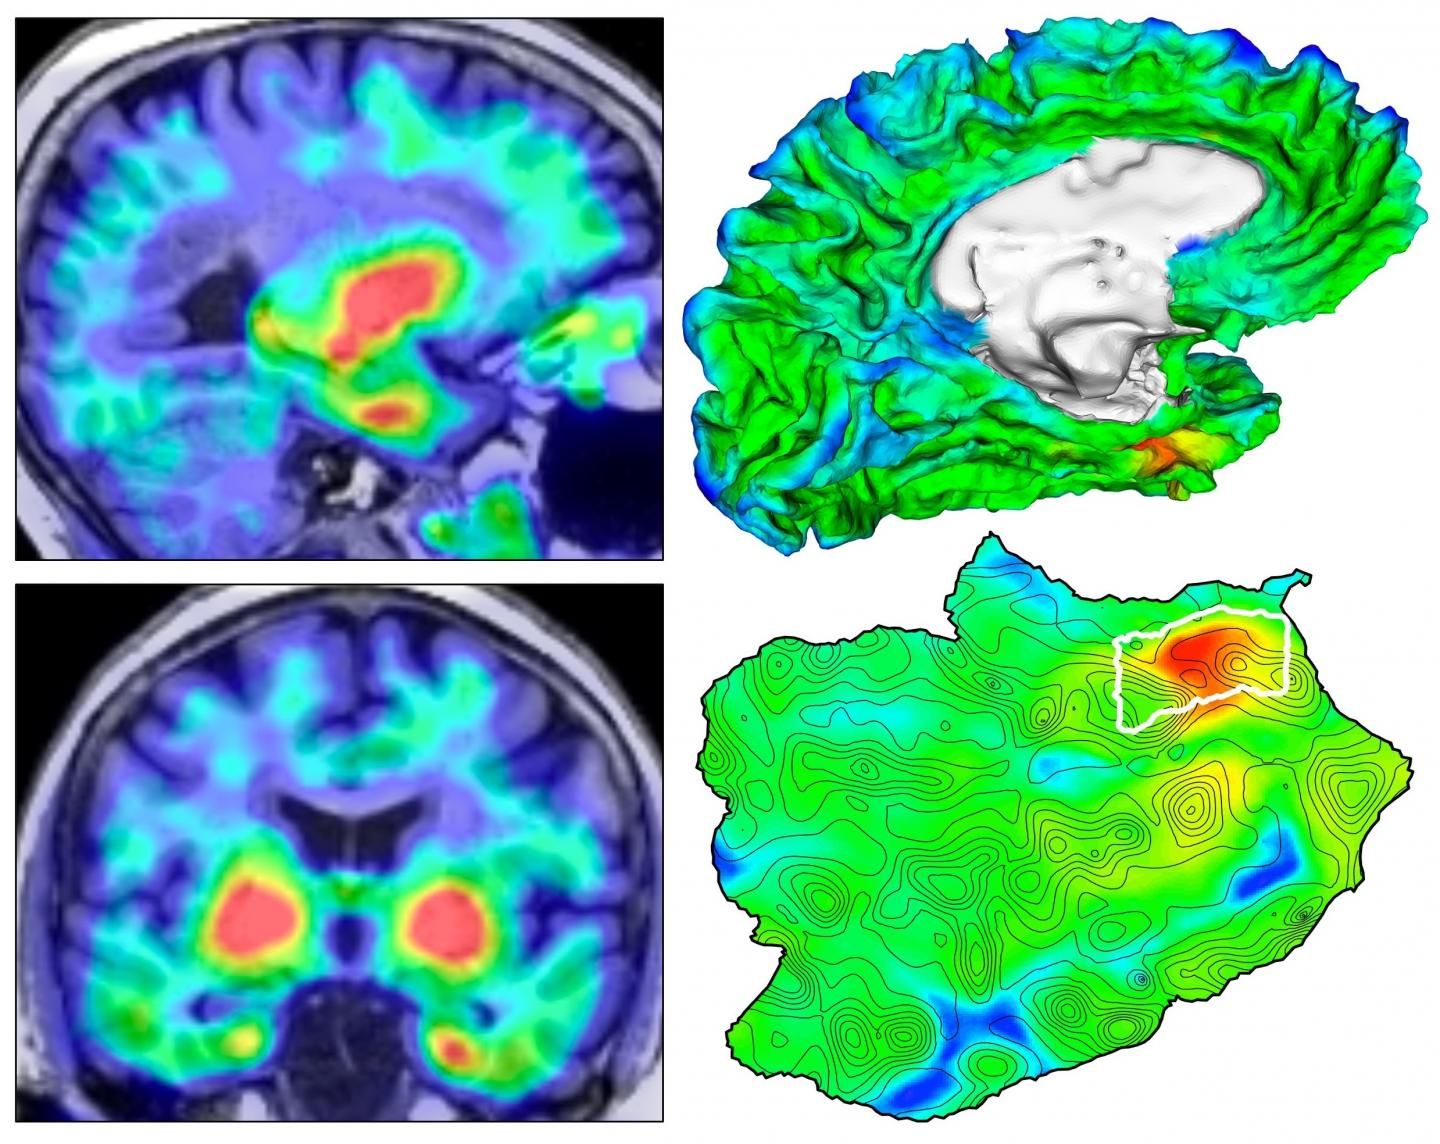 PET Imaging Reveals Site Tau's Emergence in Alzheimer's